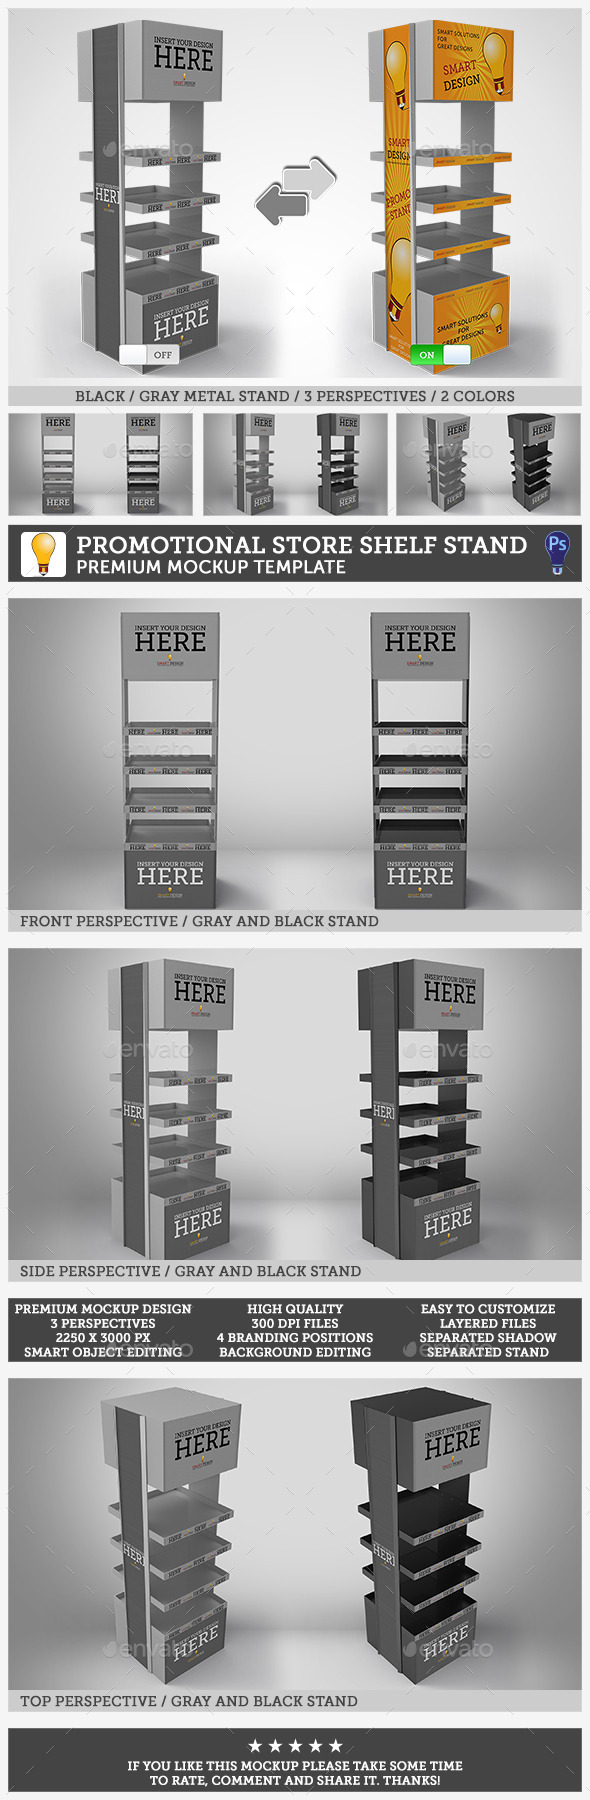 Download Stock Graphic - GraphicRiver Promotional Store Shelf Stand ...